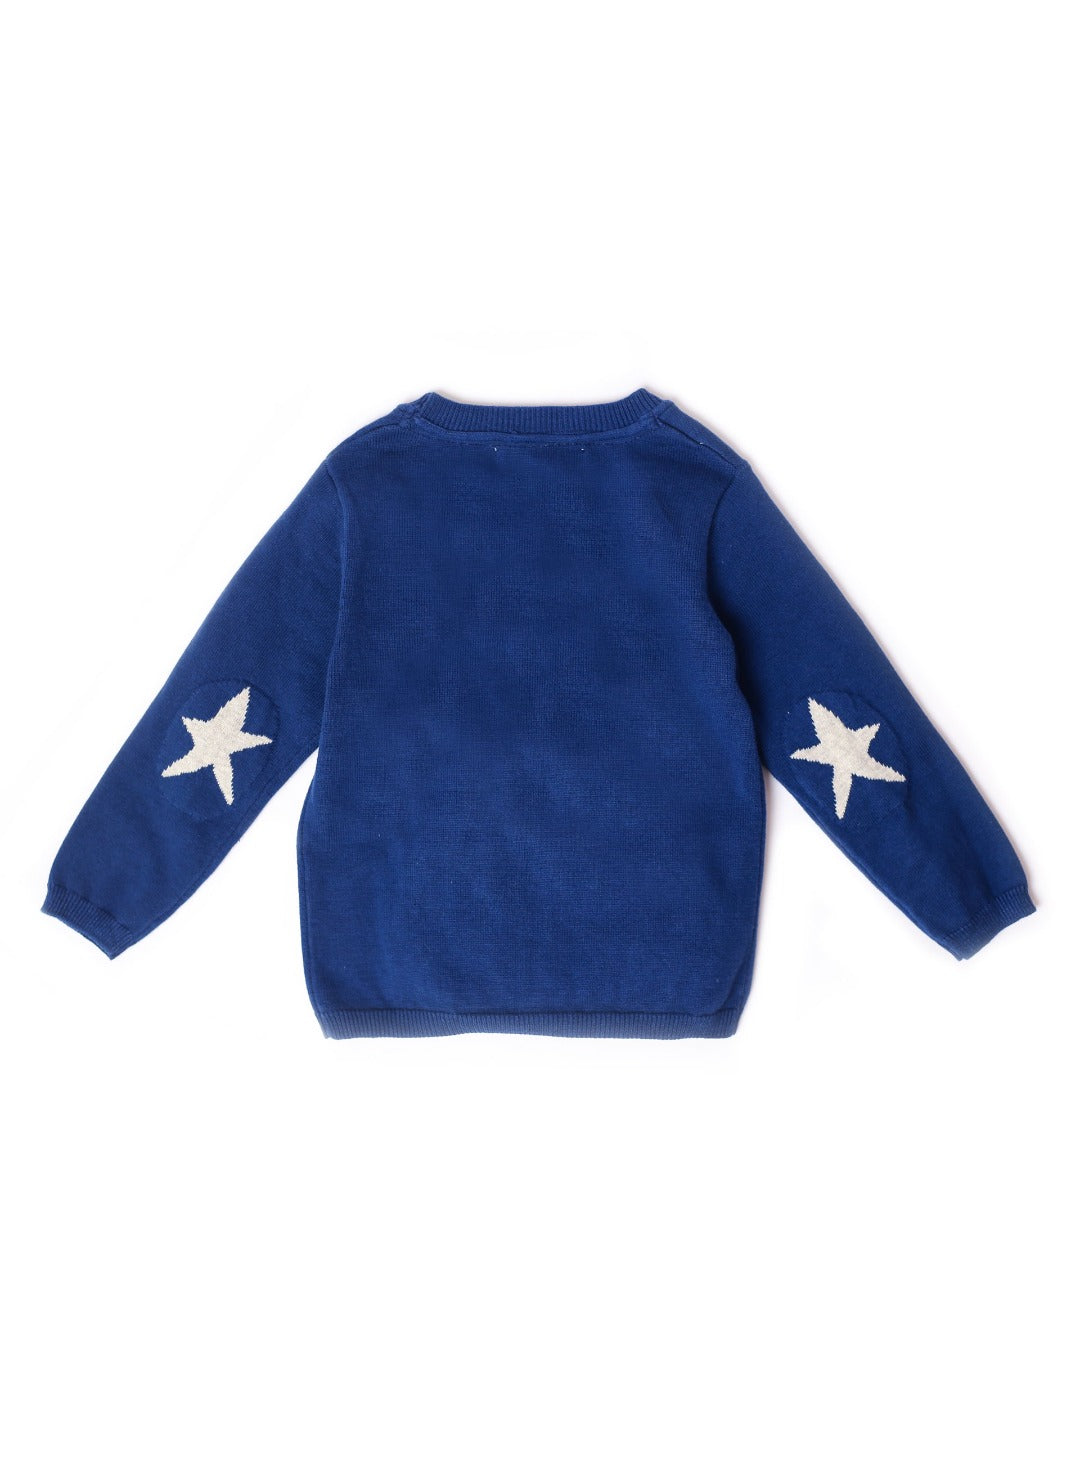 royal blue cardigan with star elbow patch